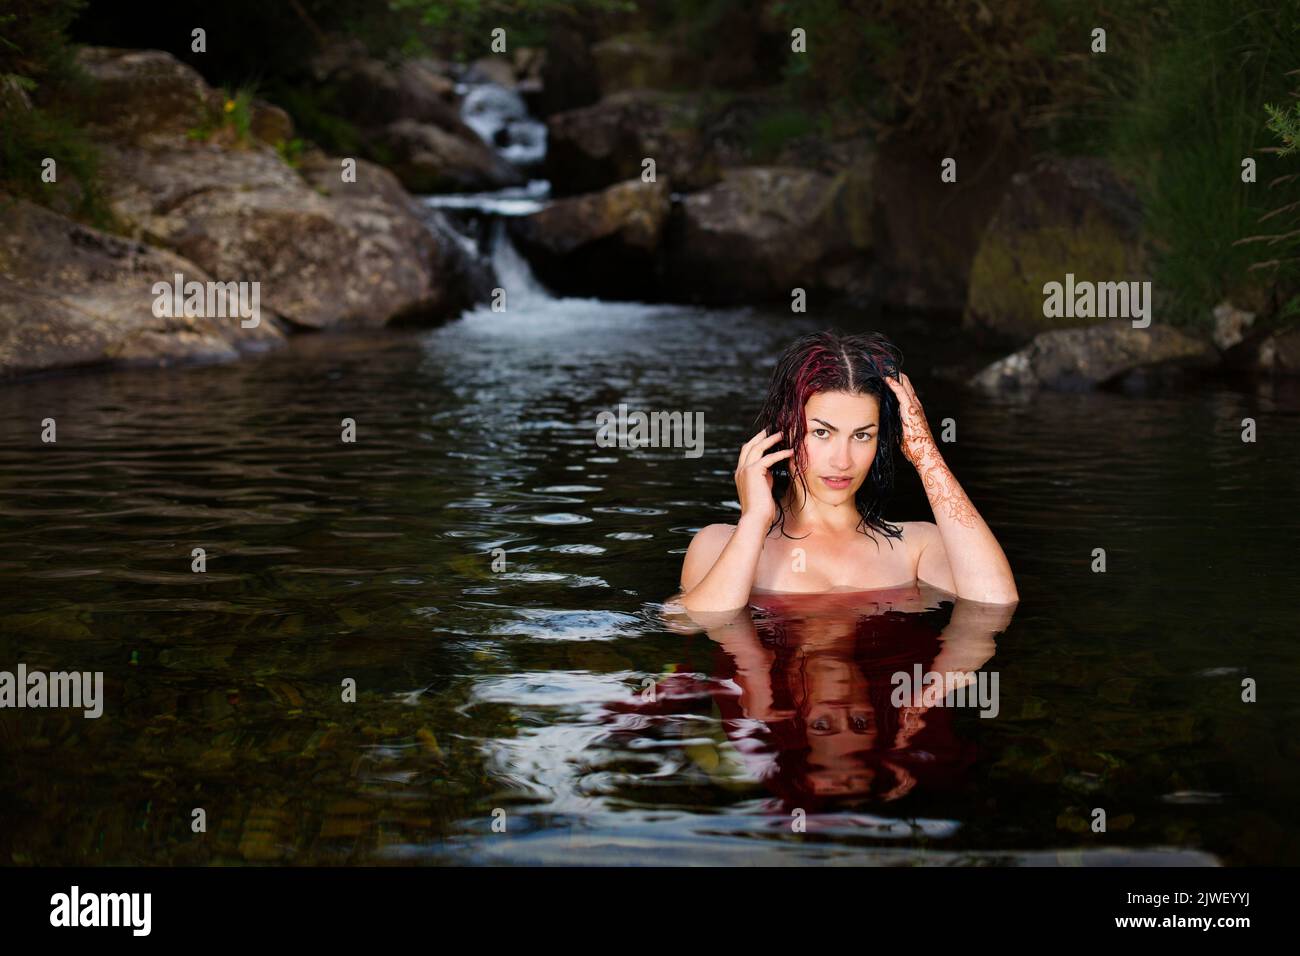 A beautiful woman cooling of in a river Stock Photo